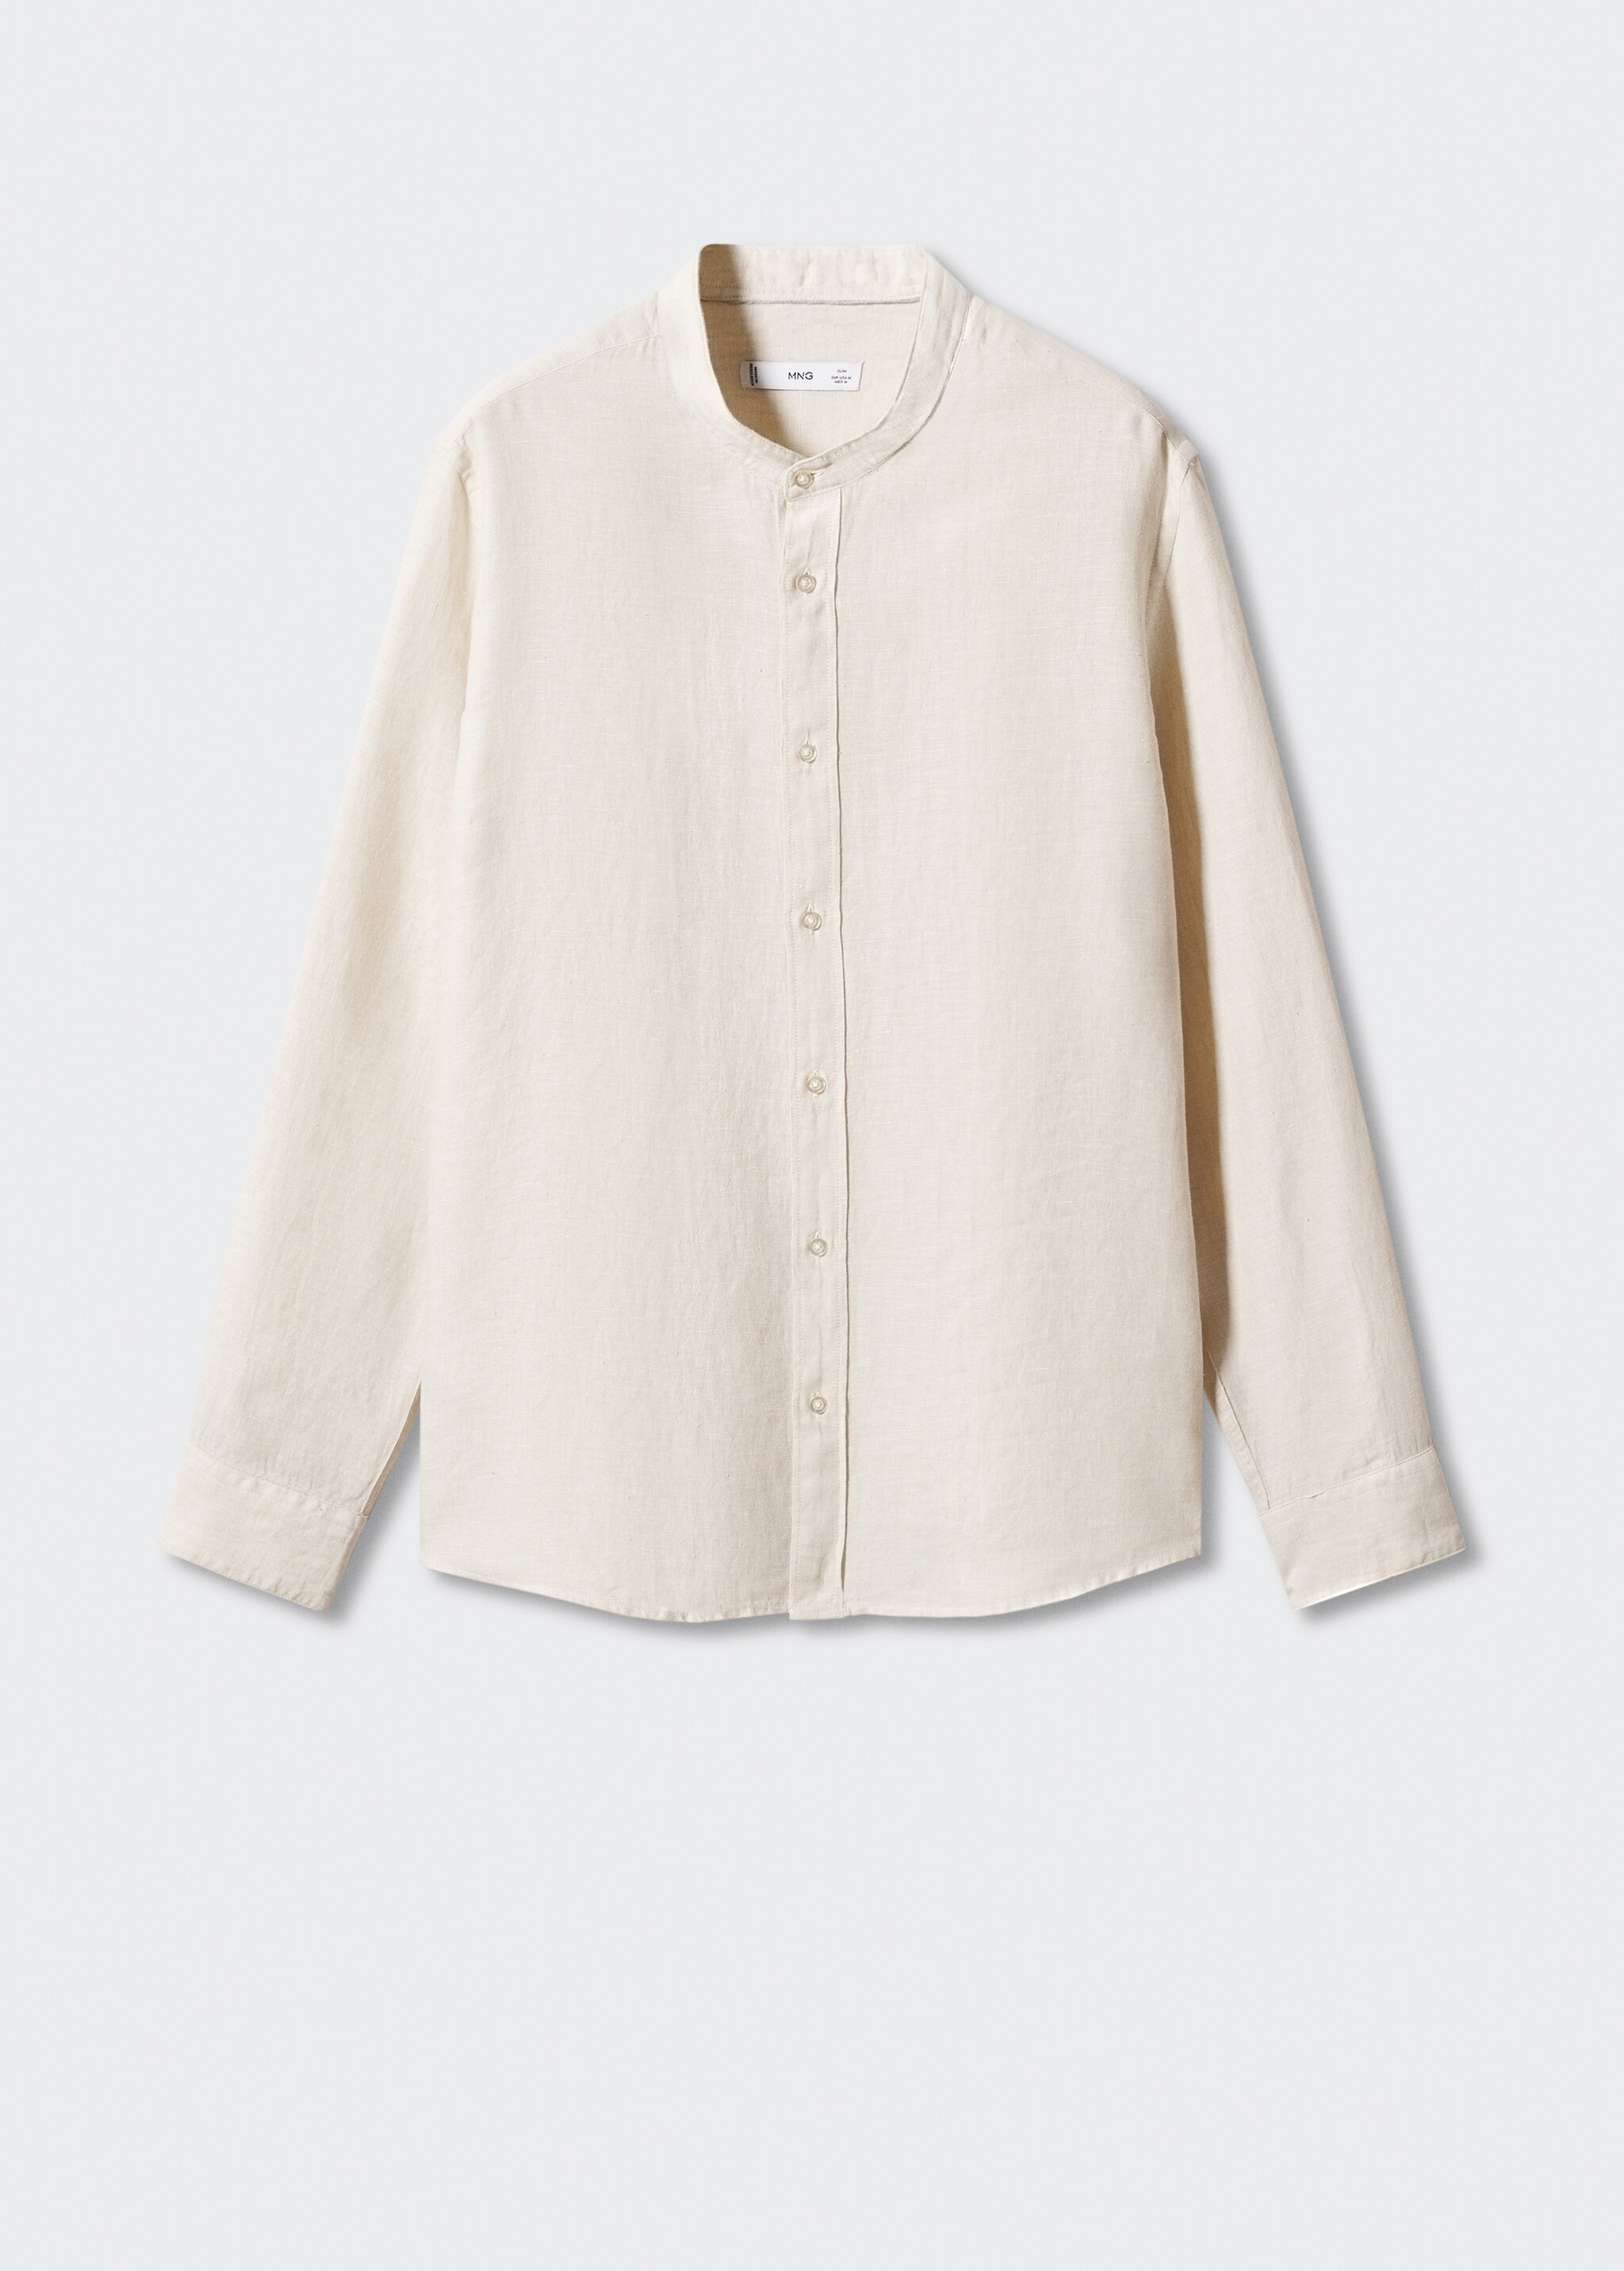 100% linen Mao collar shirt - Article without model